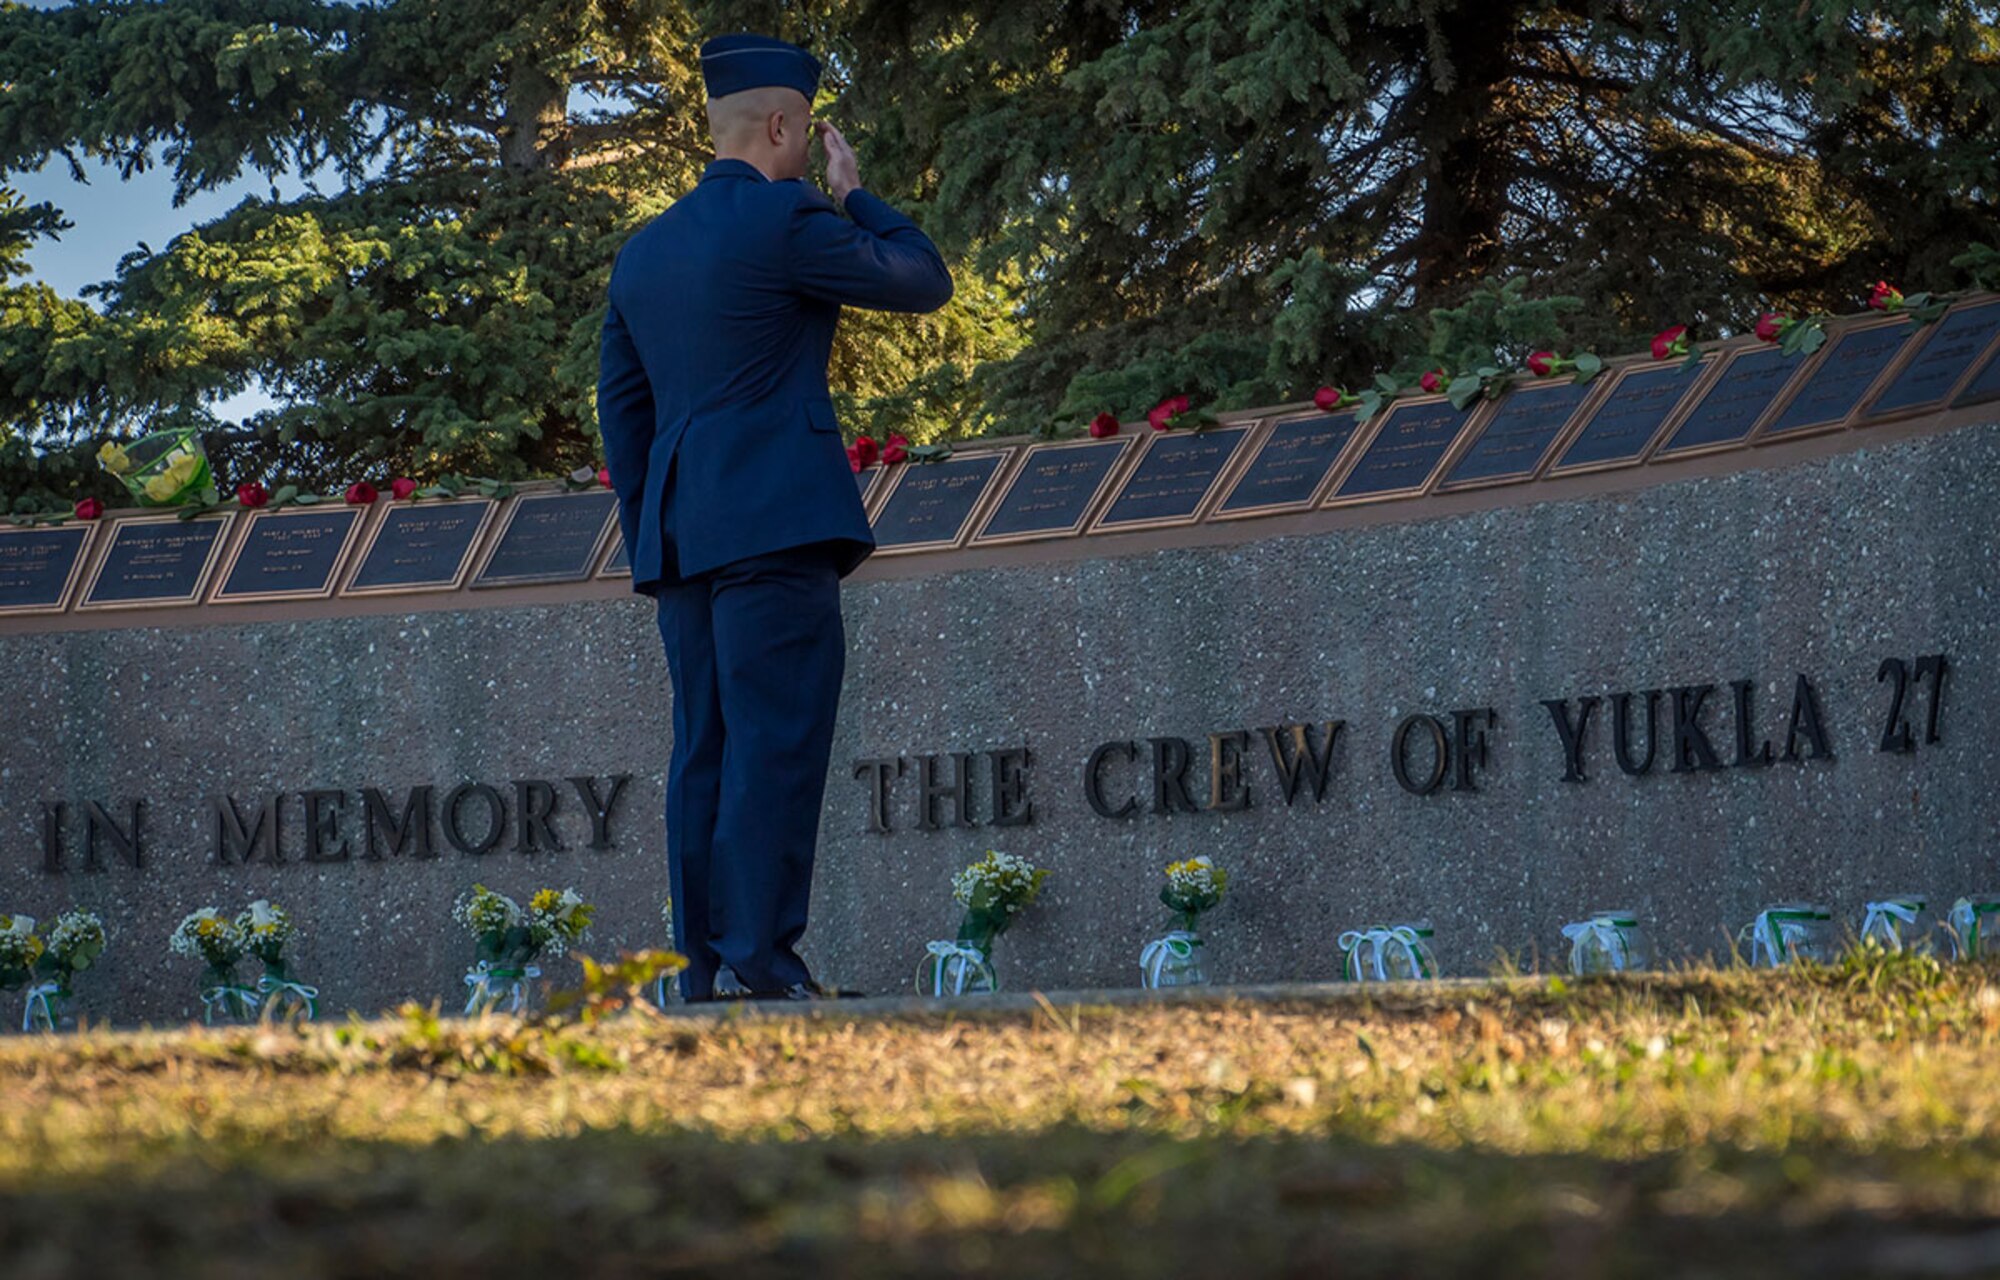 An Airman salutes after placing flowers during a ceremony as American, and Canadian Airmen assigned to the 962nd Airborne Air Control Squadron, distinguished guests, and surviving family members of the crew of the E-3B Sentry, Airborne Warning and Control System aircraft, call sign "YUKLA 27" gathered for 20th anniversary memorial ceremonies on Joint Base Elmendorf-Richardson, Alaska, Tuesday, Sept. 22, 2015. On Elmendorf Air Force Base, Sept. 22, 1995, the “YUKLA 27" aircraft from the 962nd Airborne Air Control Squadron encountered a flock of geese and crashed shortly after takeoff on a routine surveillance training sortie, killing all 24 U.S. and Canadian Airmen aboard. (U.S. Air Force photo by Justin Connaher/Released)